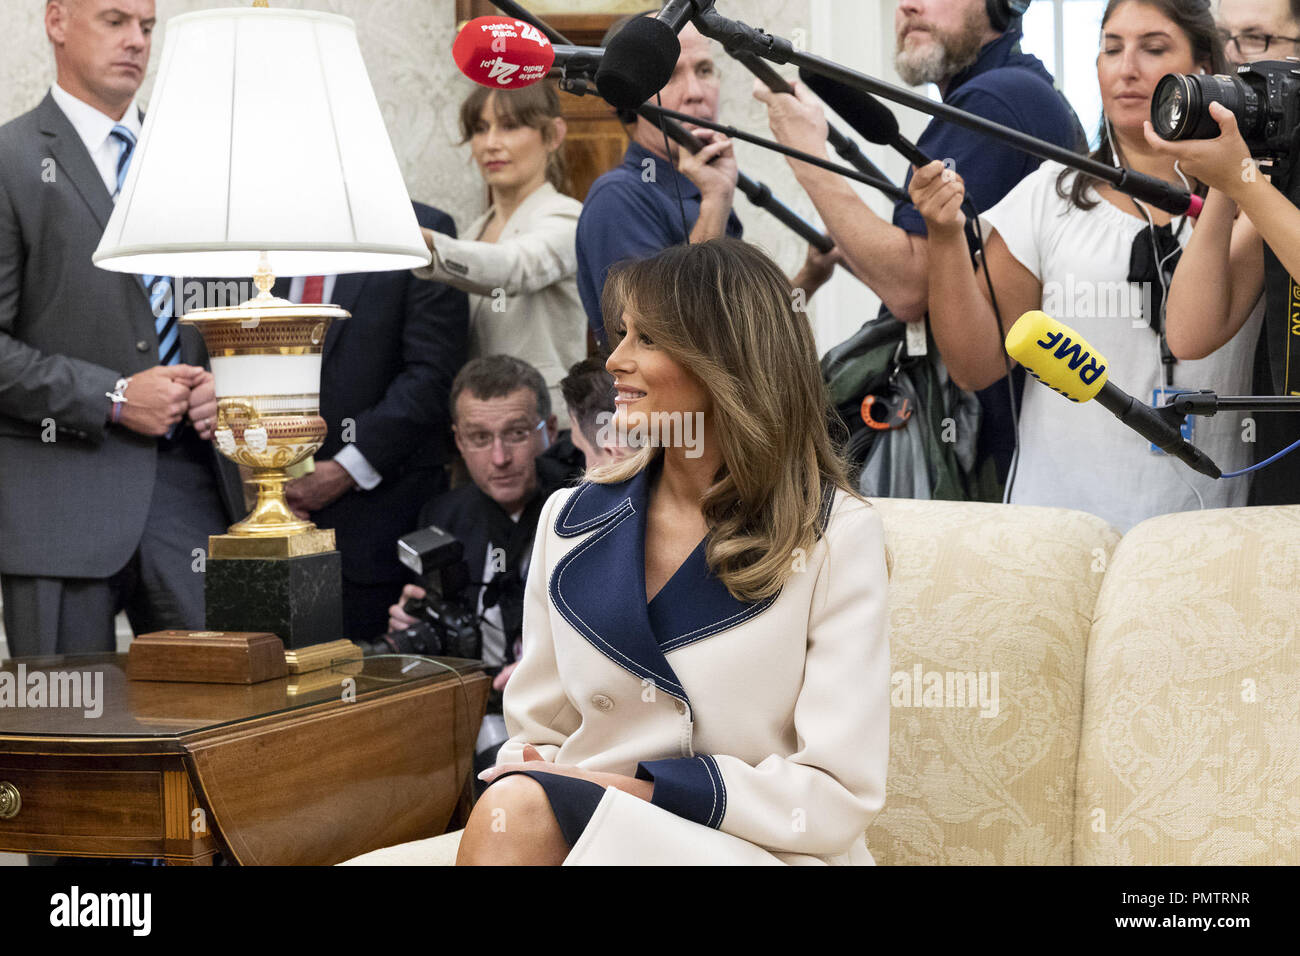 First Lady Melania Trump during the visit of Andrzej Duda, President of the Republic of Poland and his wife Mrs. 18th Sep, 2018. Agata Kornhauser-Duda Tuesday, Sept. 18, 2018 (Official White House Photo Andrea Hanks) White House via globallookpress.com Credit: White House/Russian Look/ZUMA Wire/Alamy Live News Stock Photo